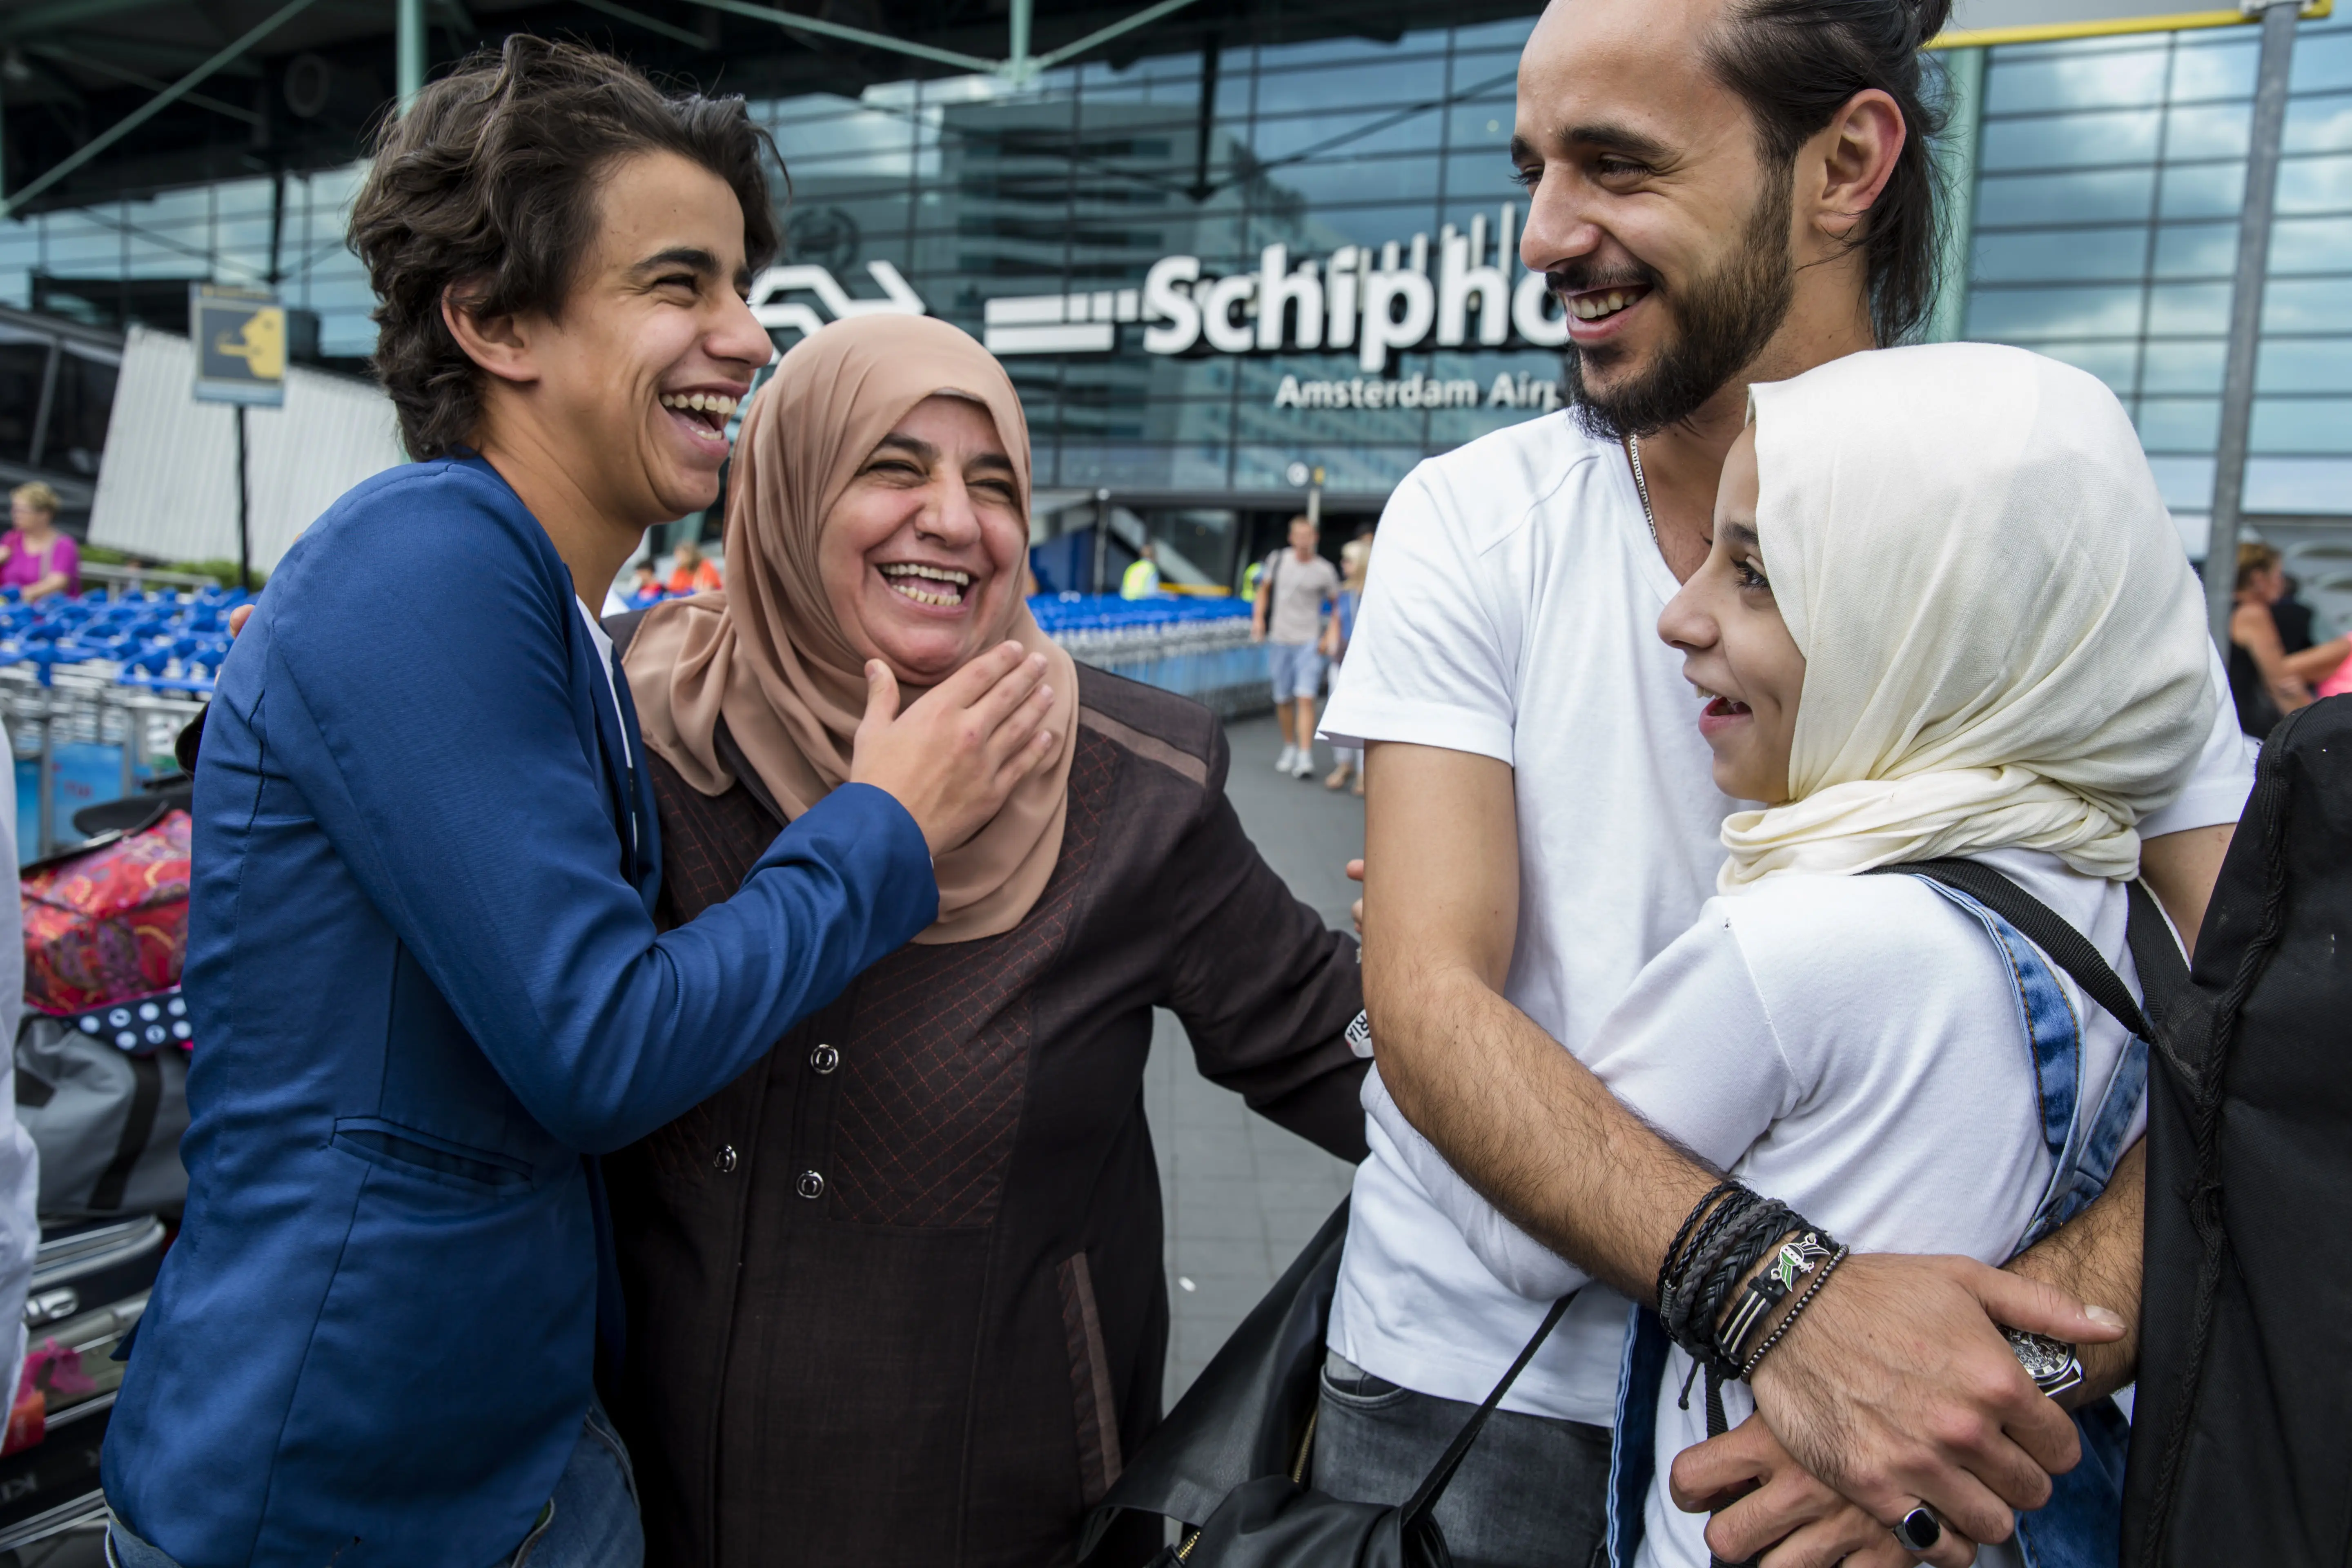 Family reunification at Schiphol Airport